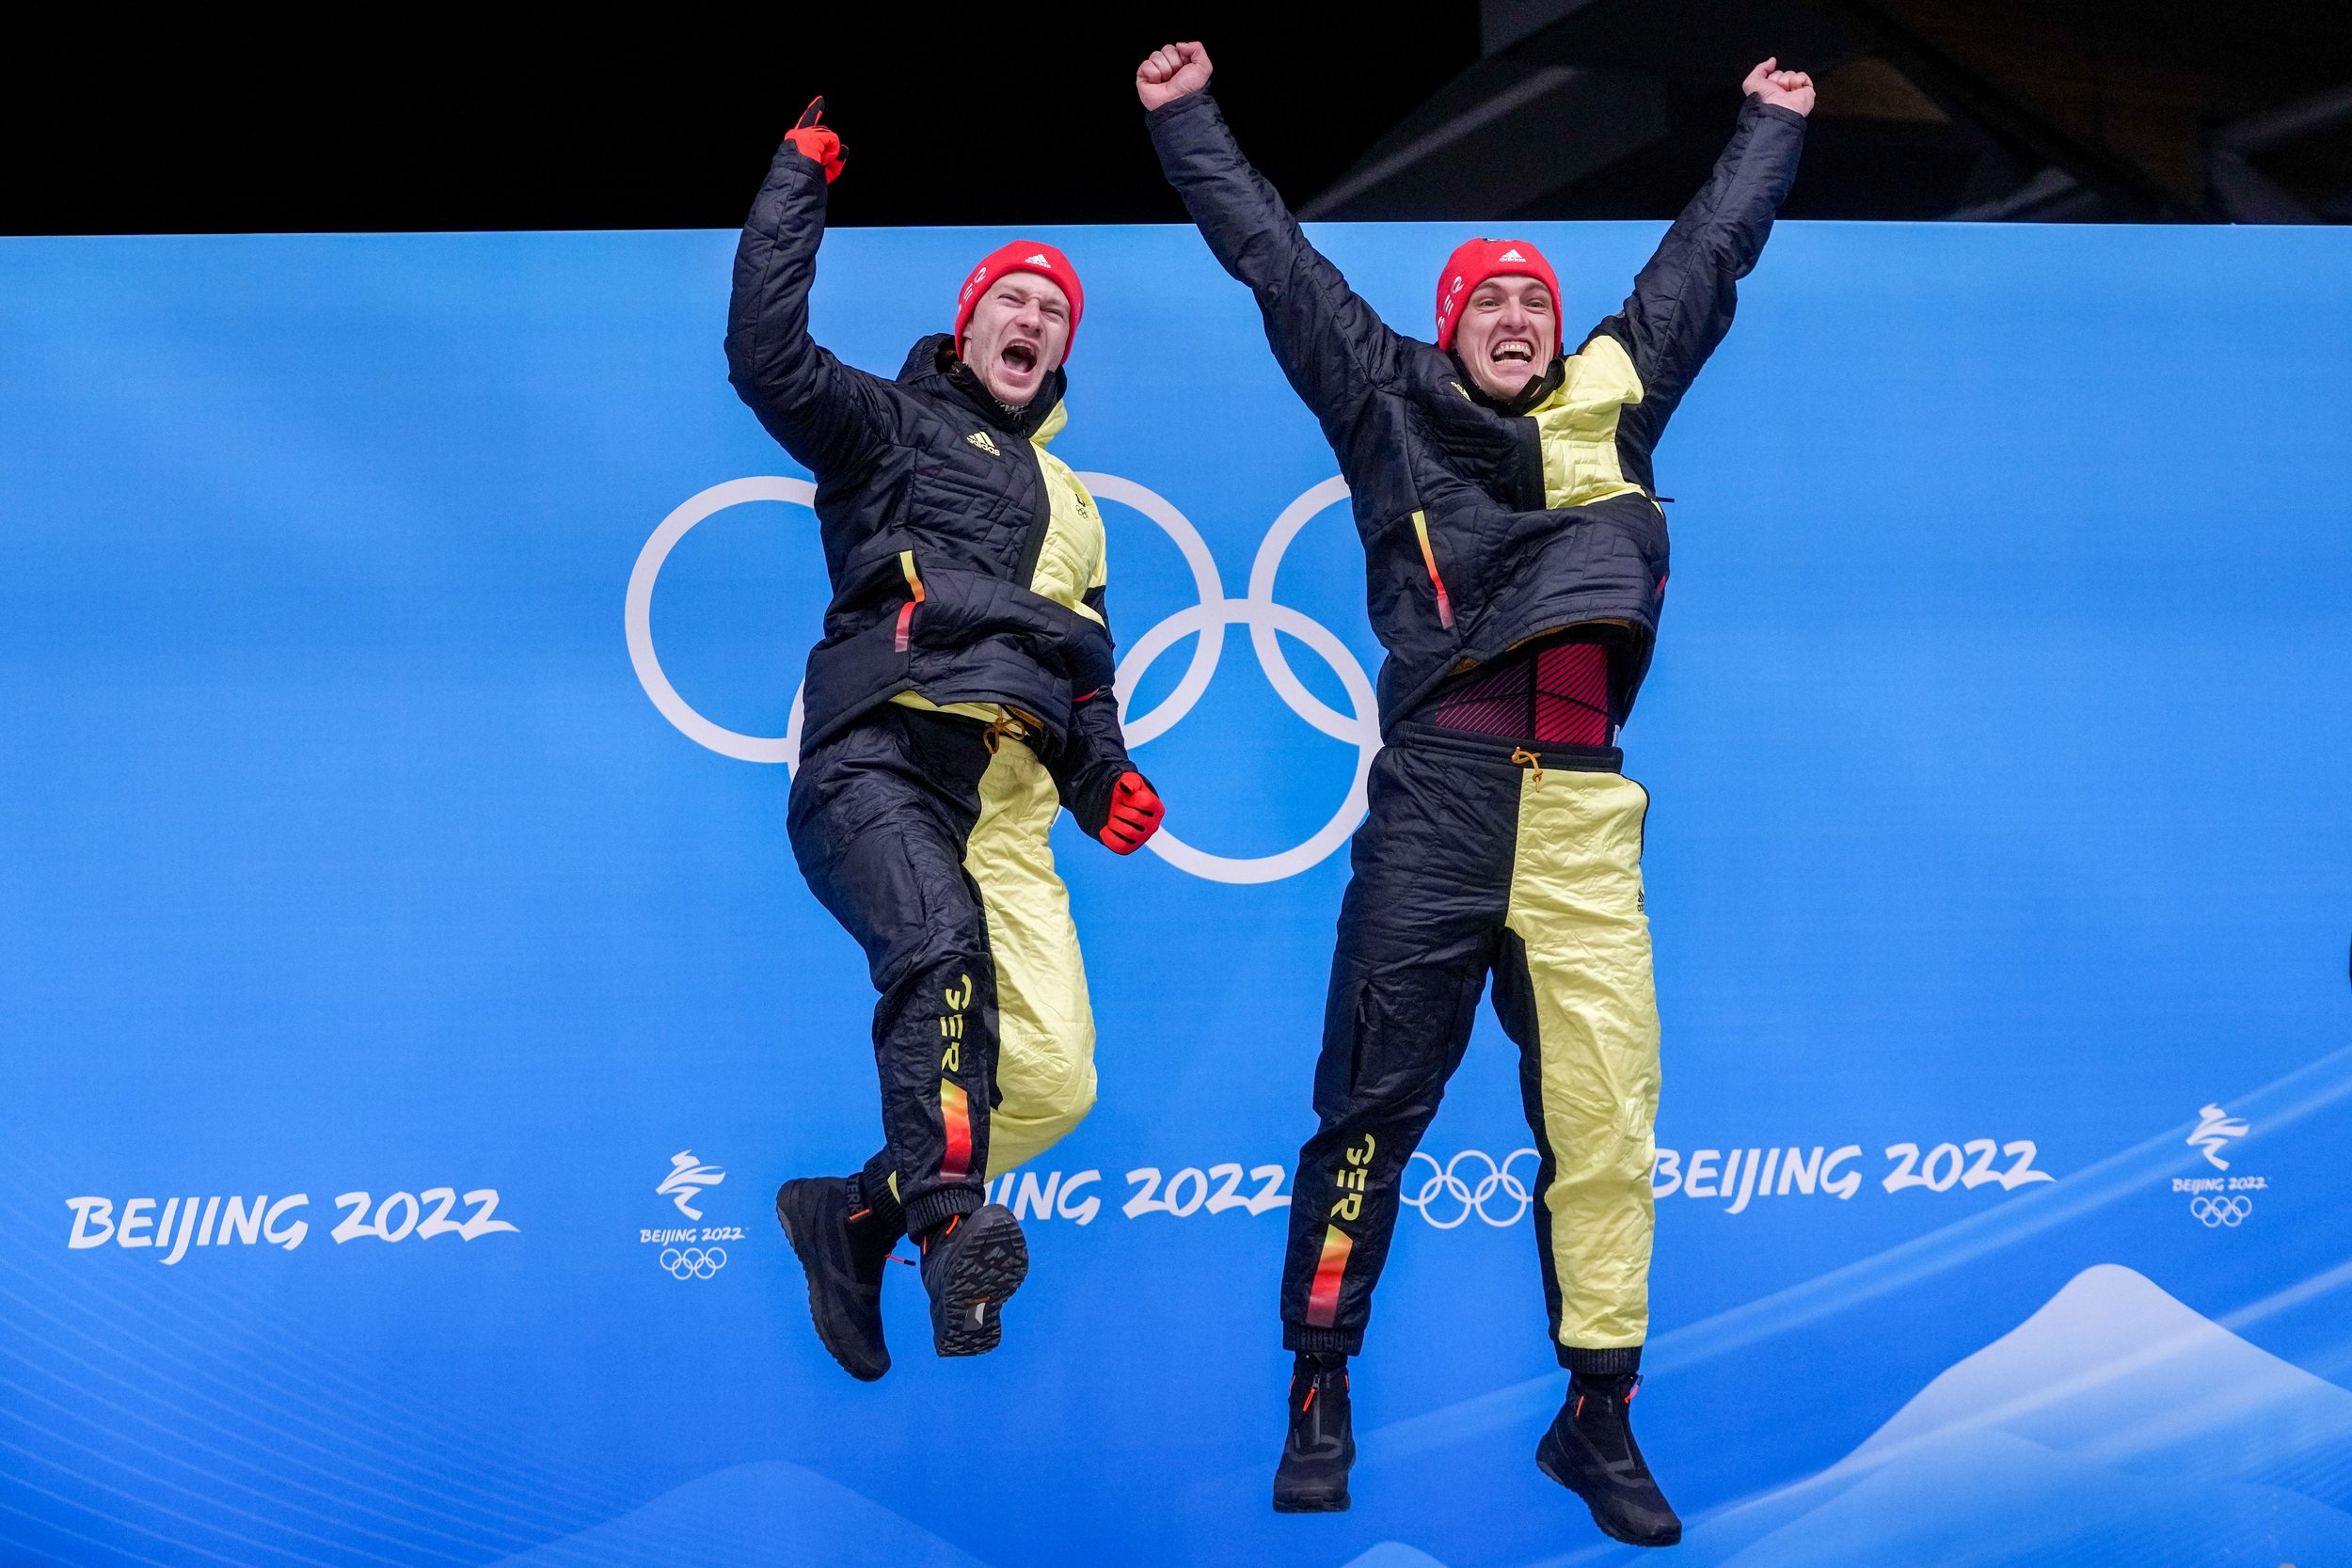  Francesco Friedrich and Thorsten Margis, of Germany, celebrate winning the gold medal in the 2-man at the 2022 Winter Olympics, Tuesday, Feb. 15, 2022, in the Yanqing district of Beijing. (AP Photo/Dmitri Lovetsky) 